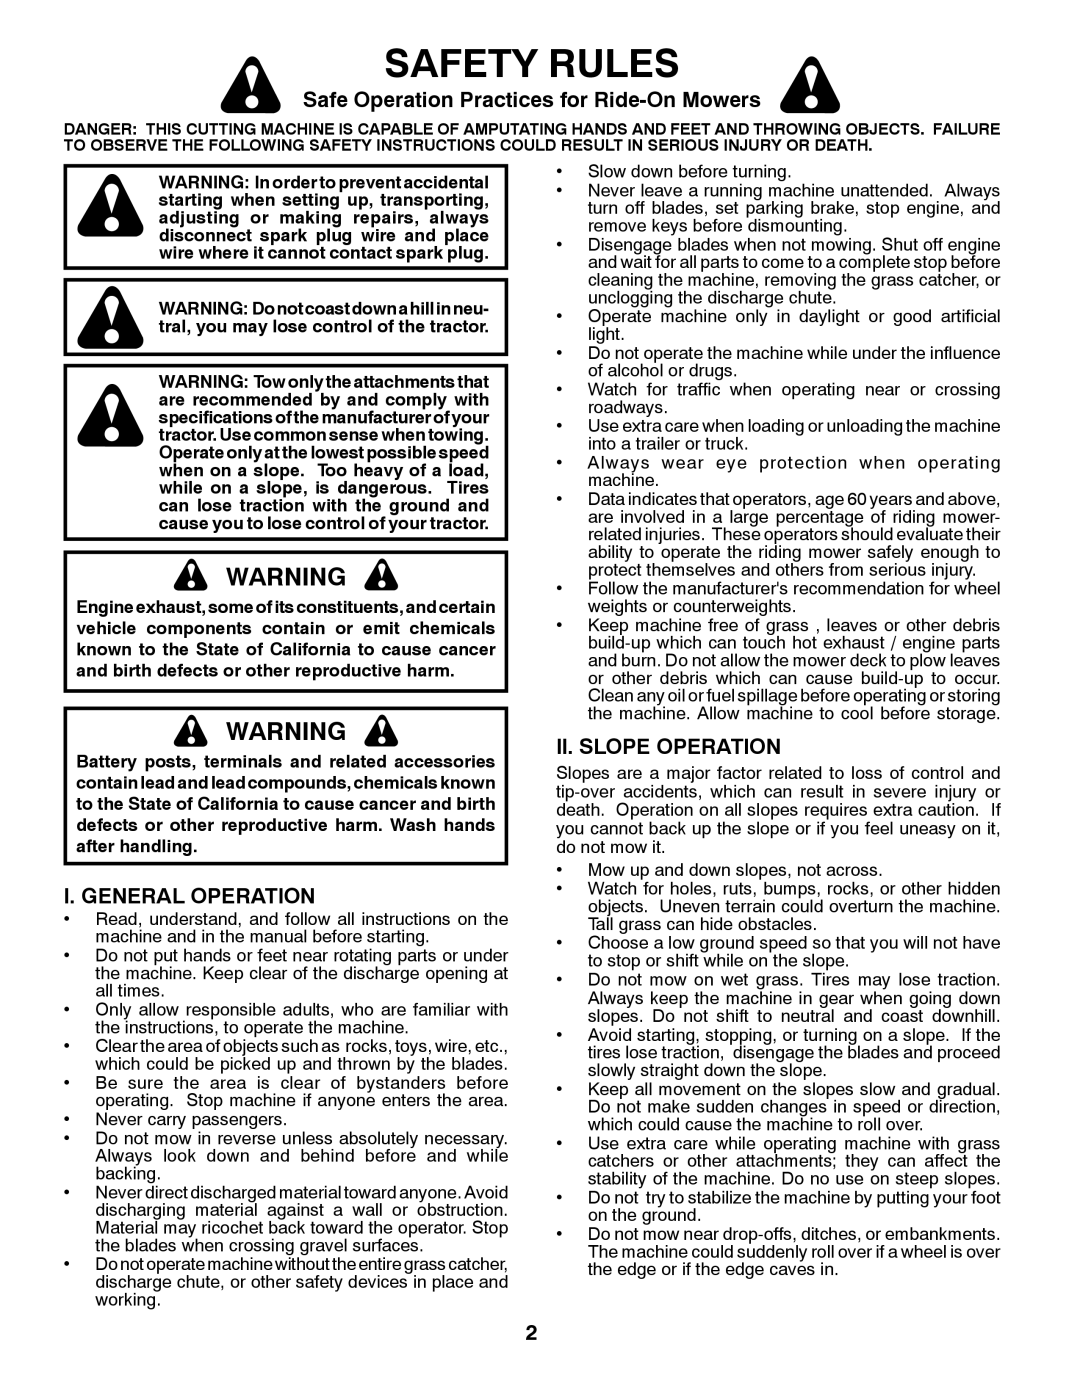 Husqvarna 96045002700 Safety Rules, Safe Operation Practices for Ride-On Mowers, I. General Operation, Ii. Slope Operation 